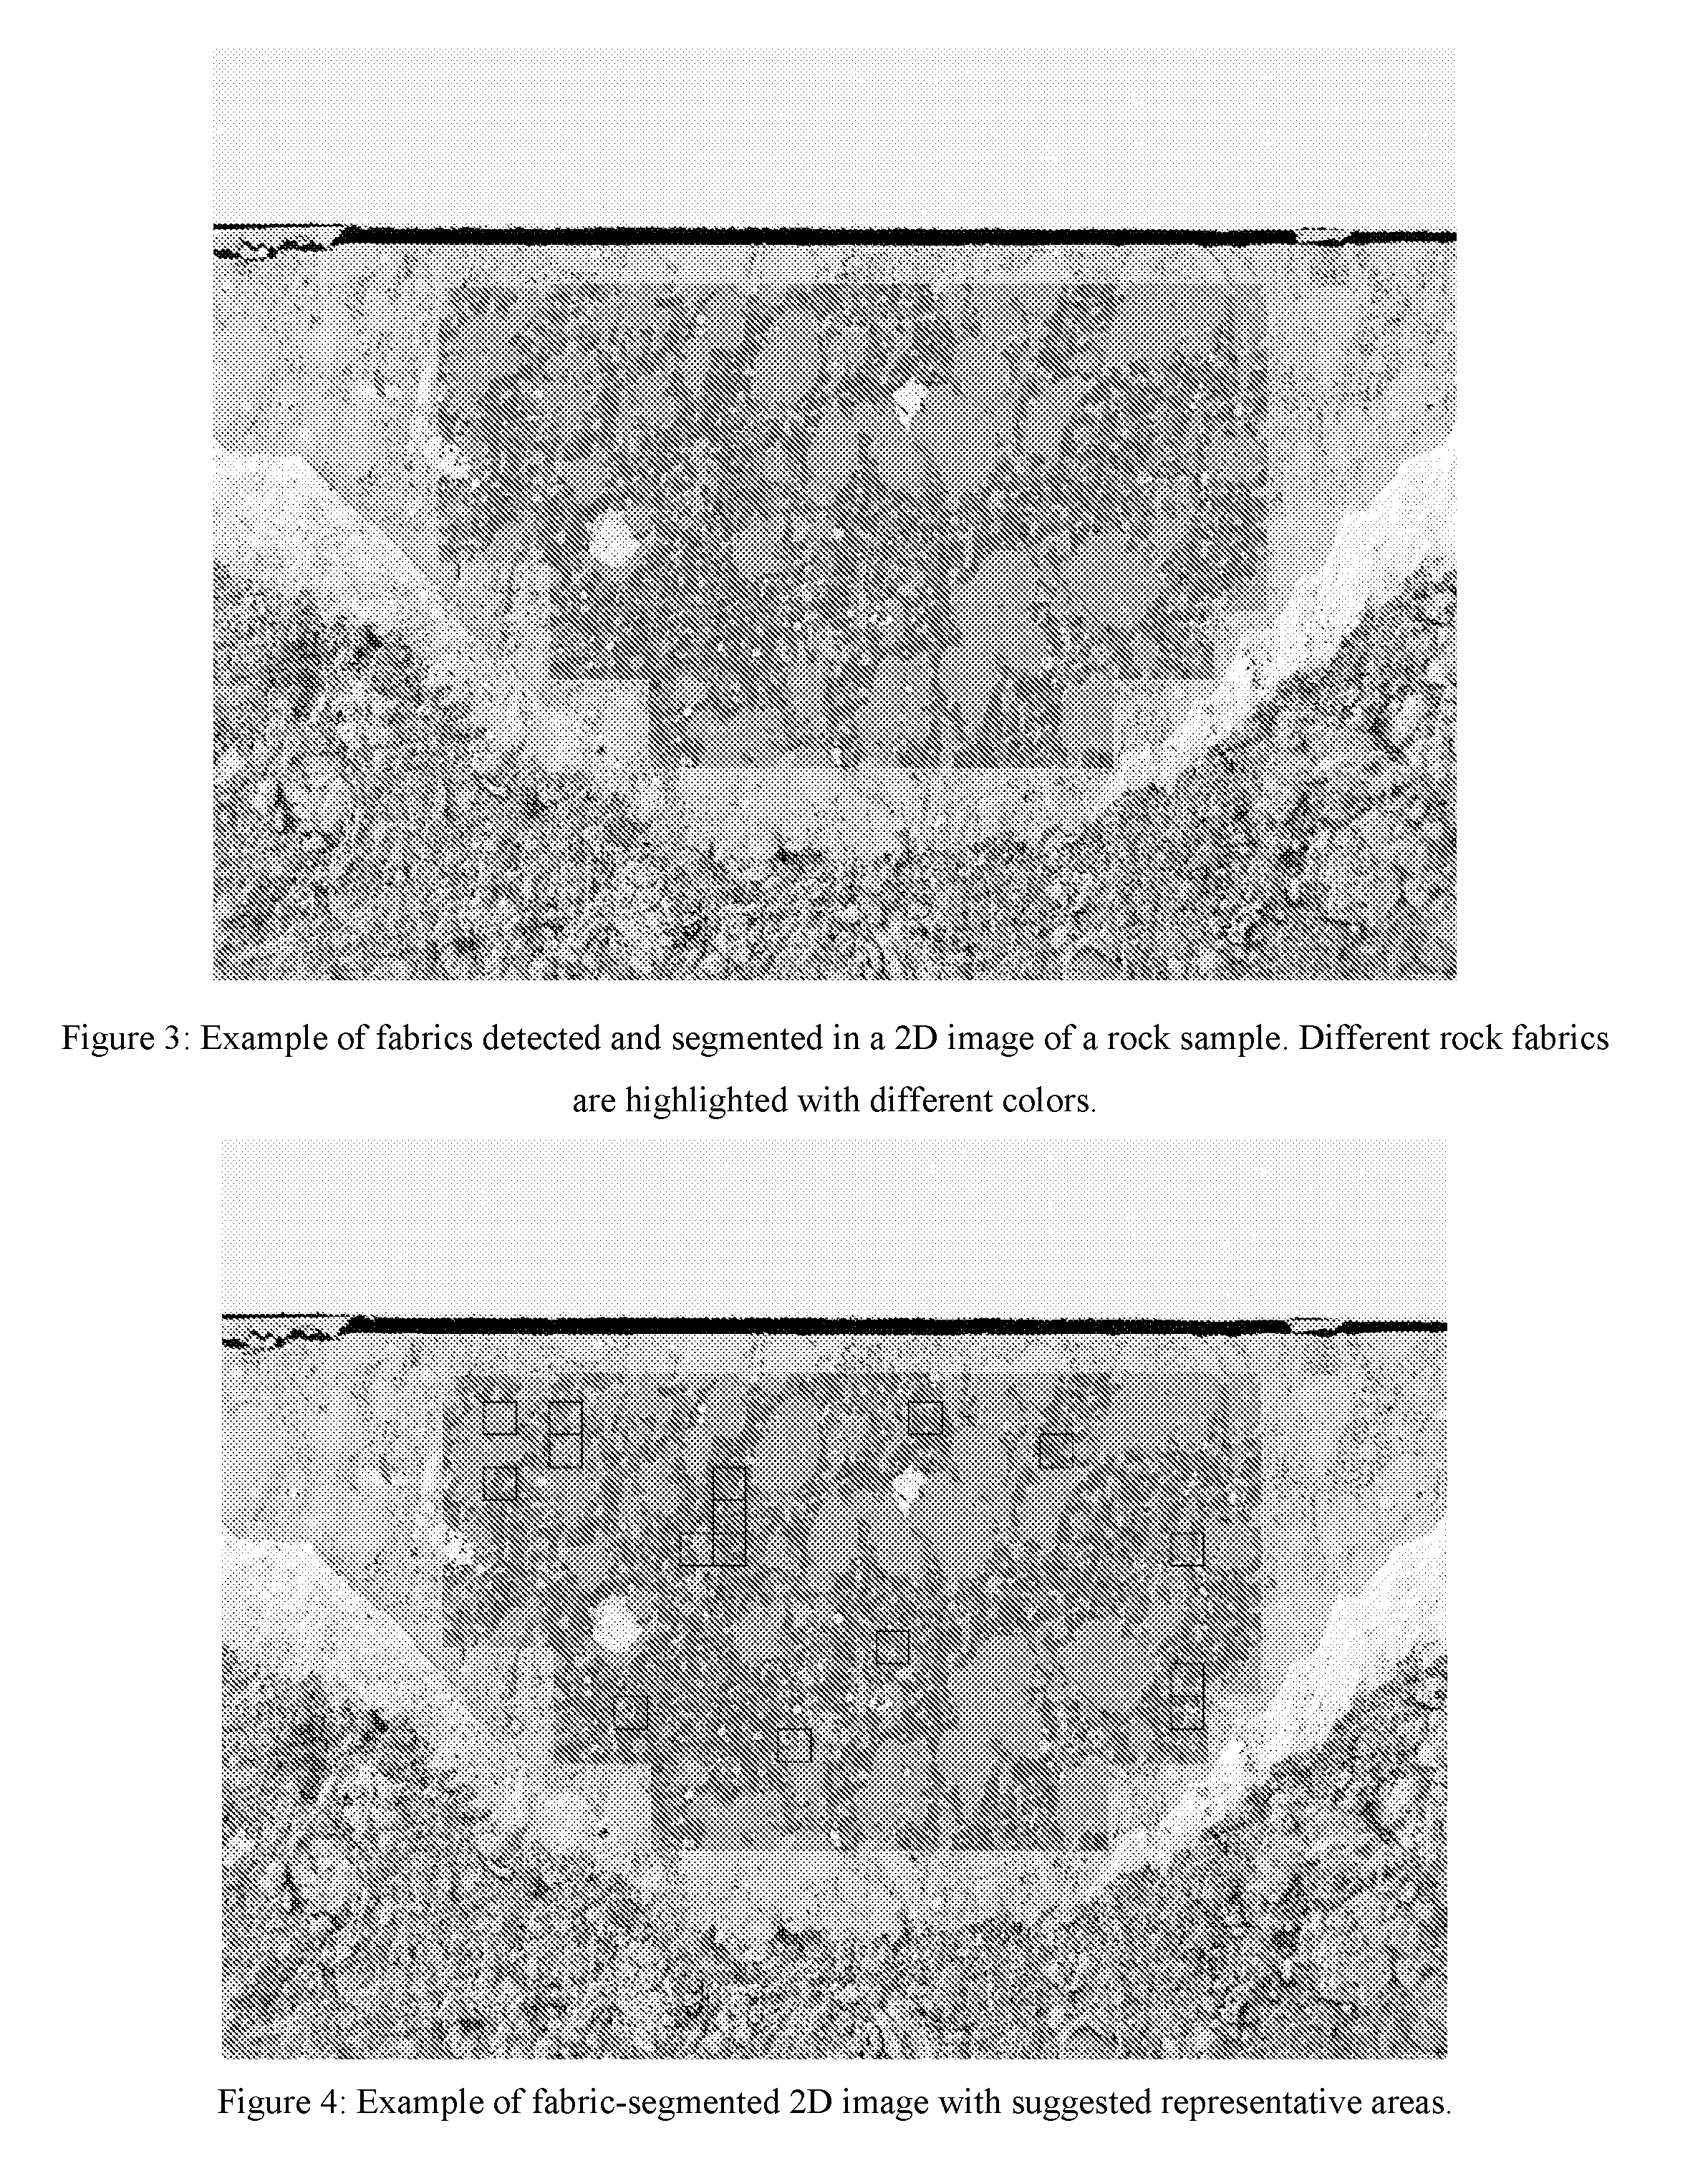 Method For Determining Fabric And Upscaled Properties Of Geological Sample